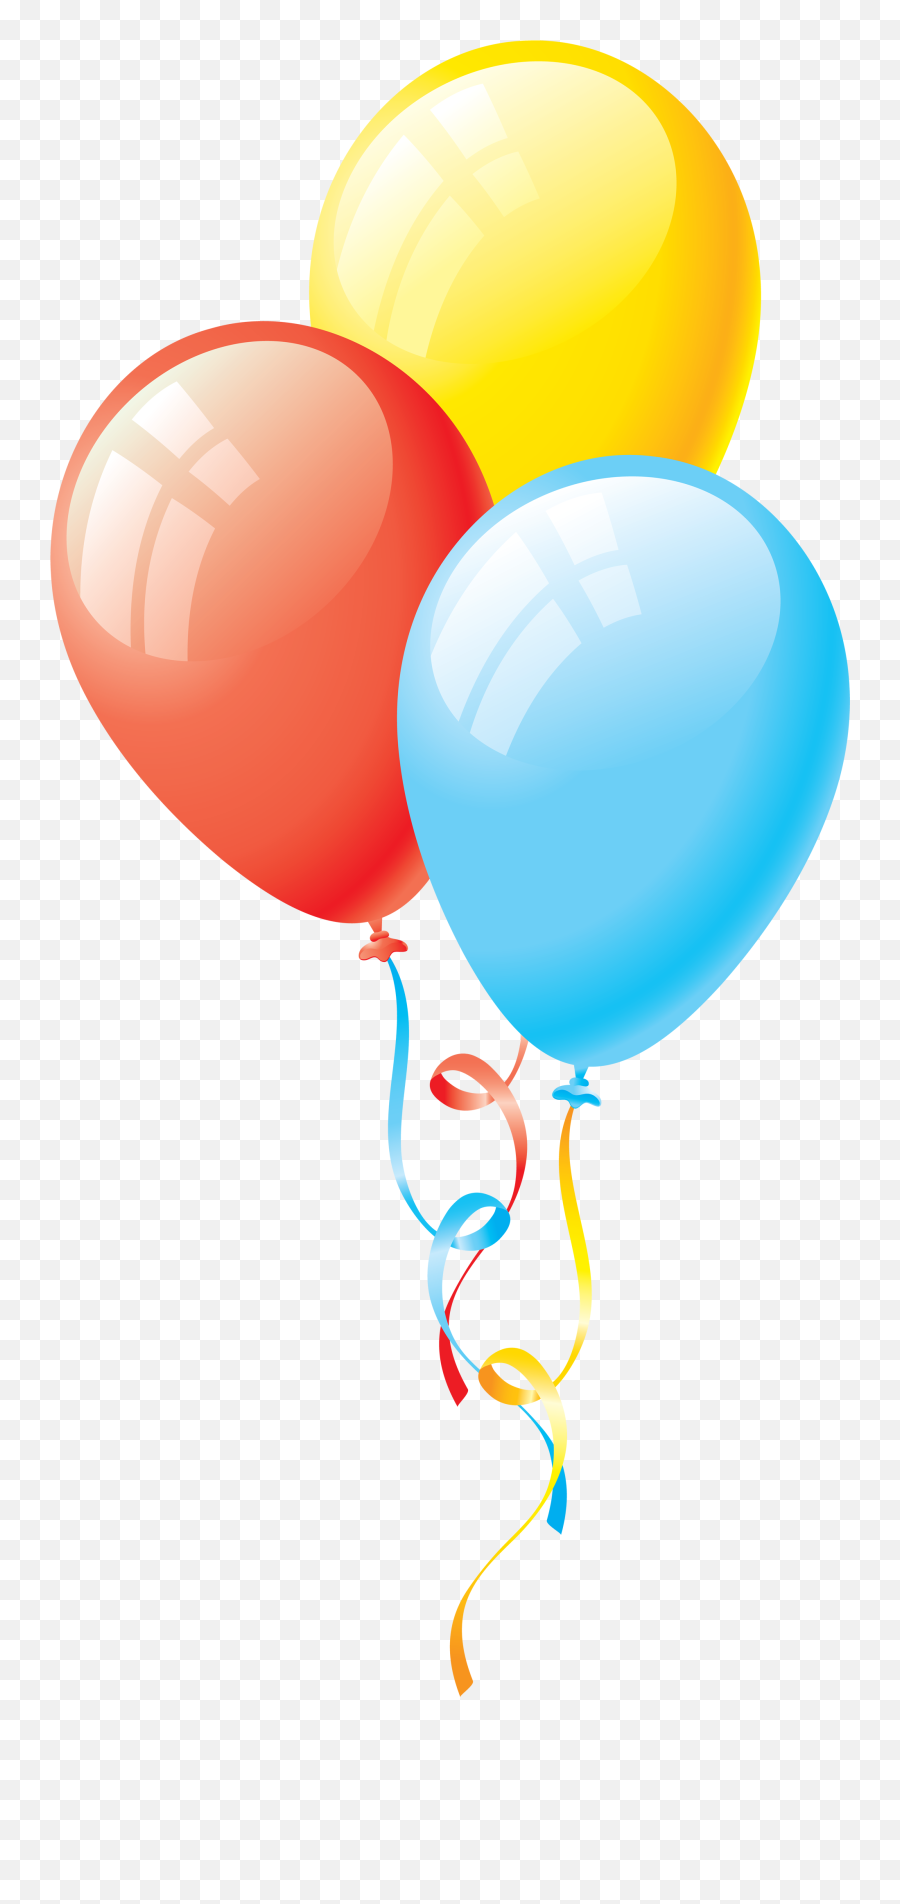 Colorful Balloon Png Image Free - Birthday Balloons Clip Art,Up Balloons Png